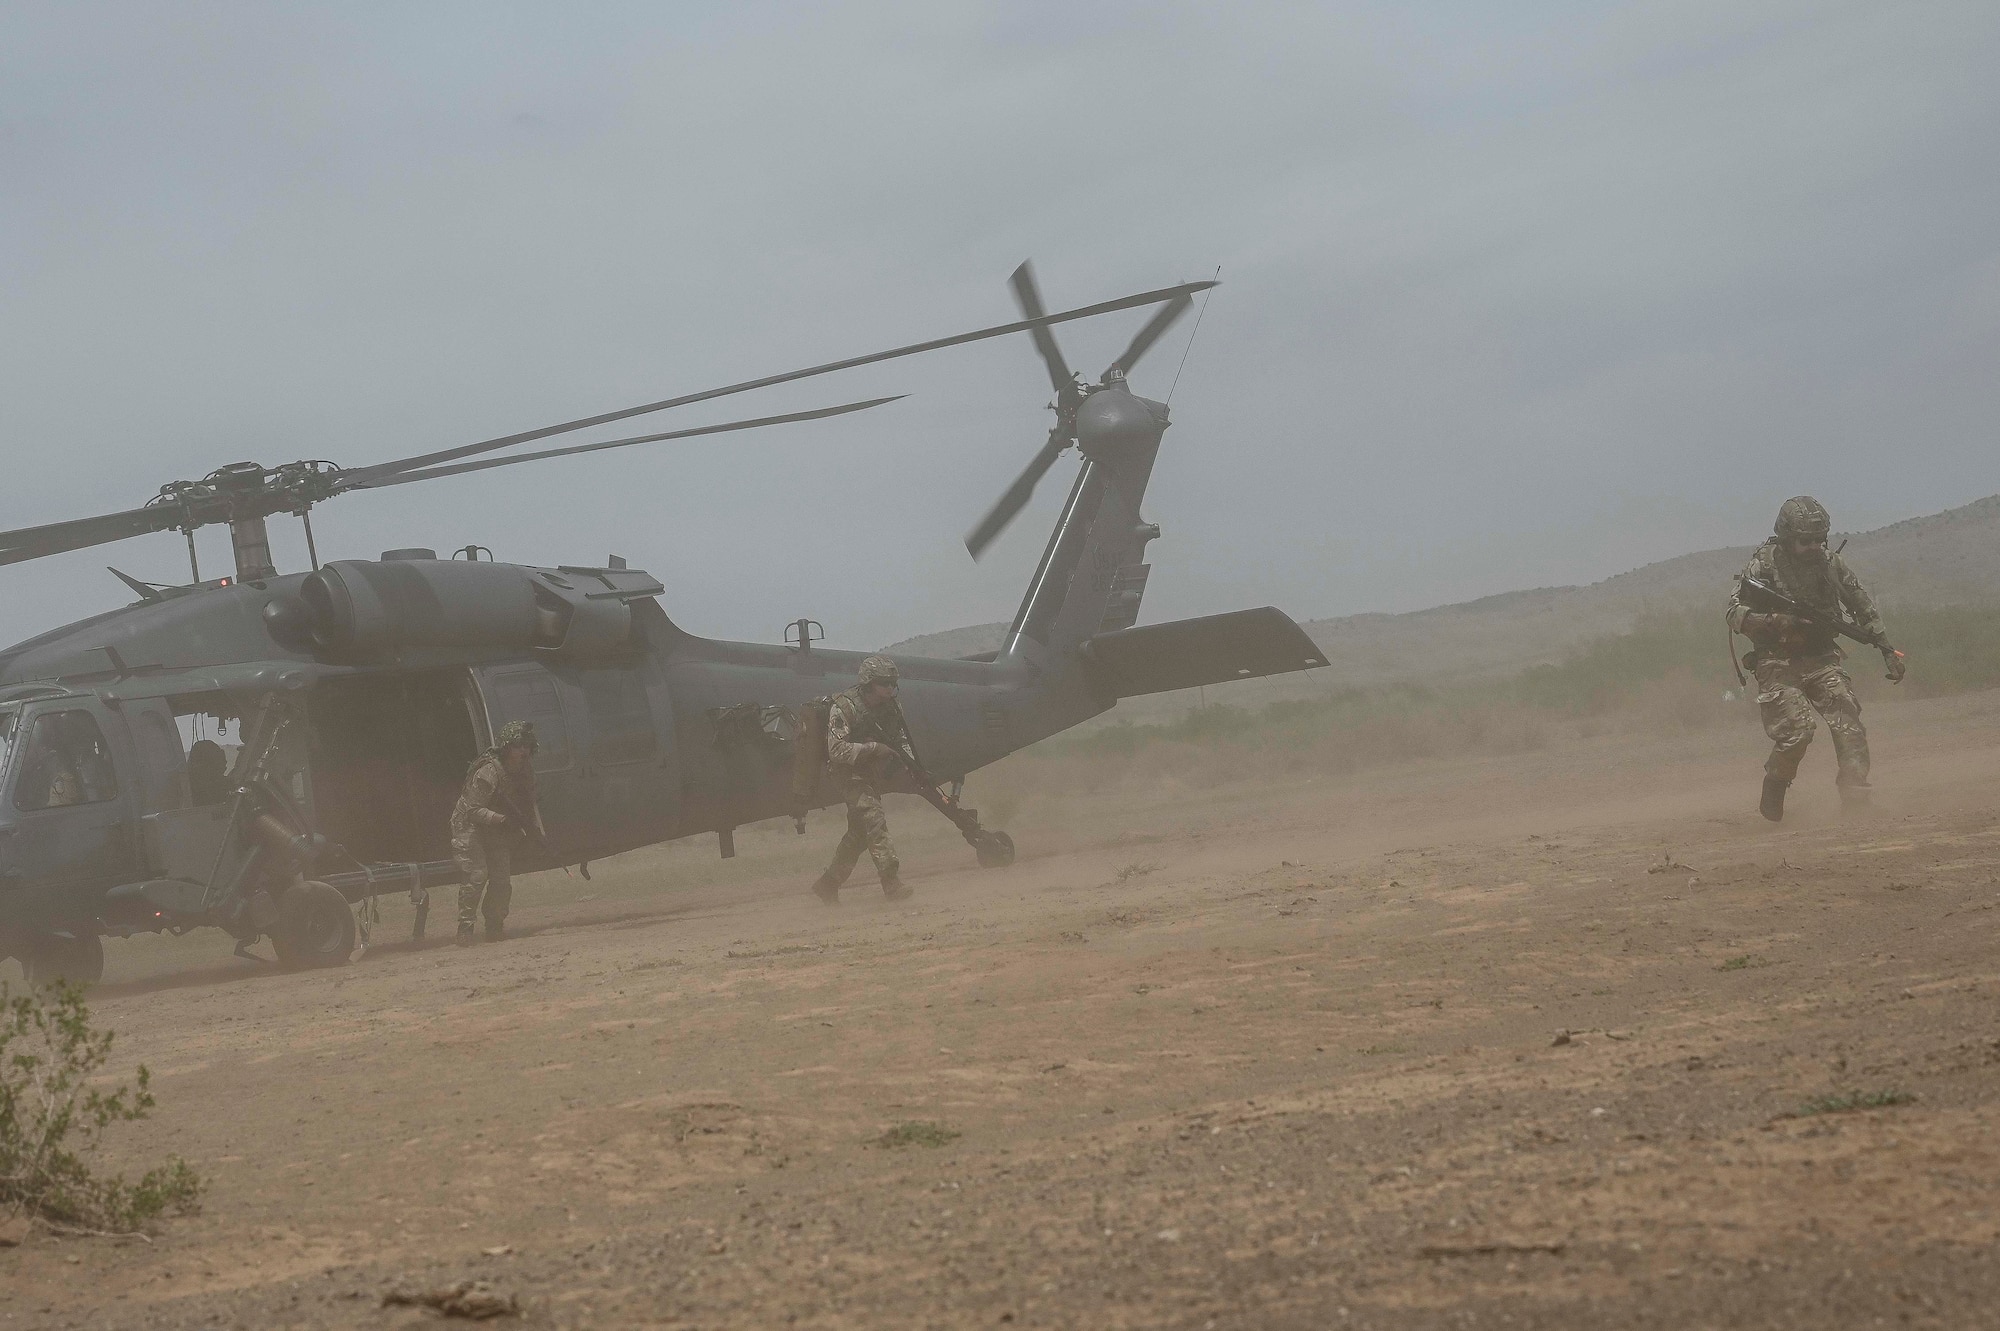 Pictured above are military members exiting a helicopter.